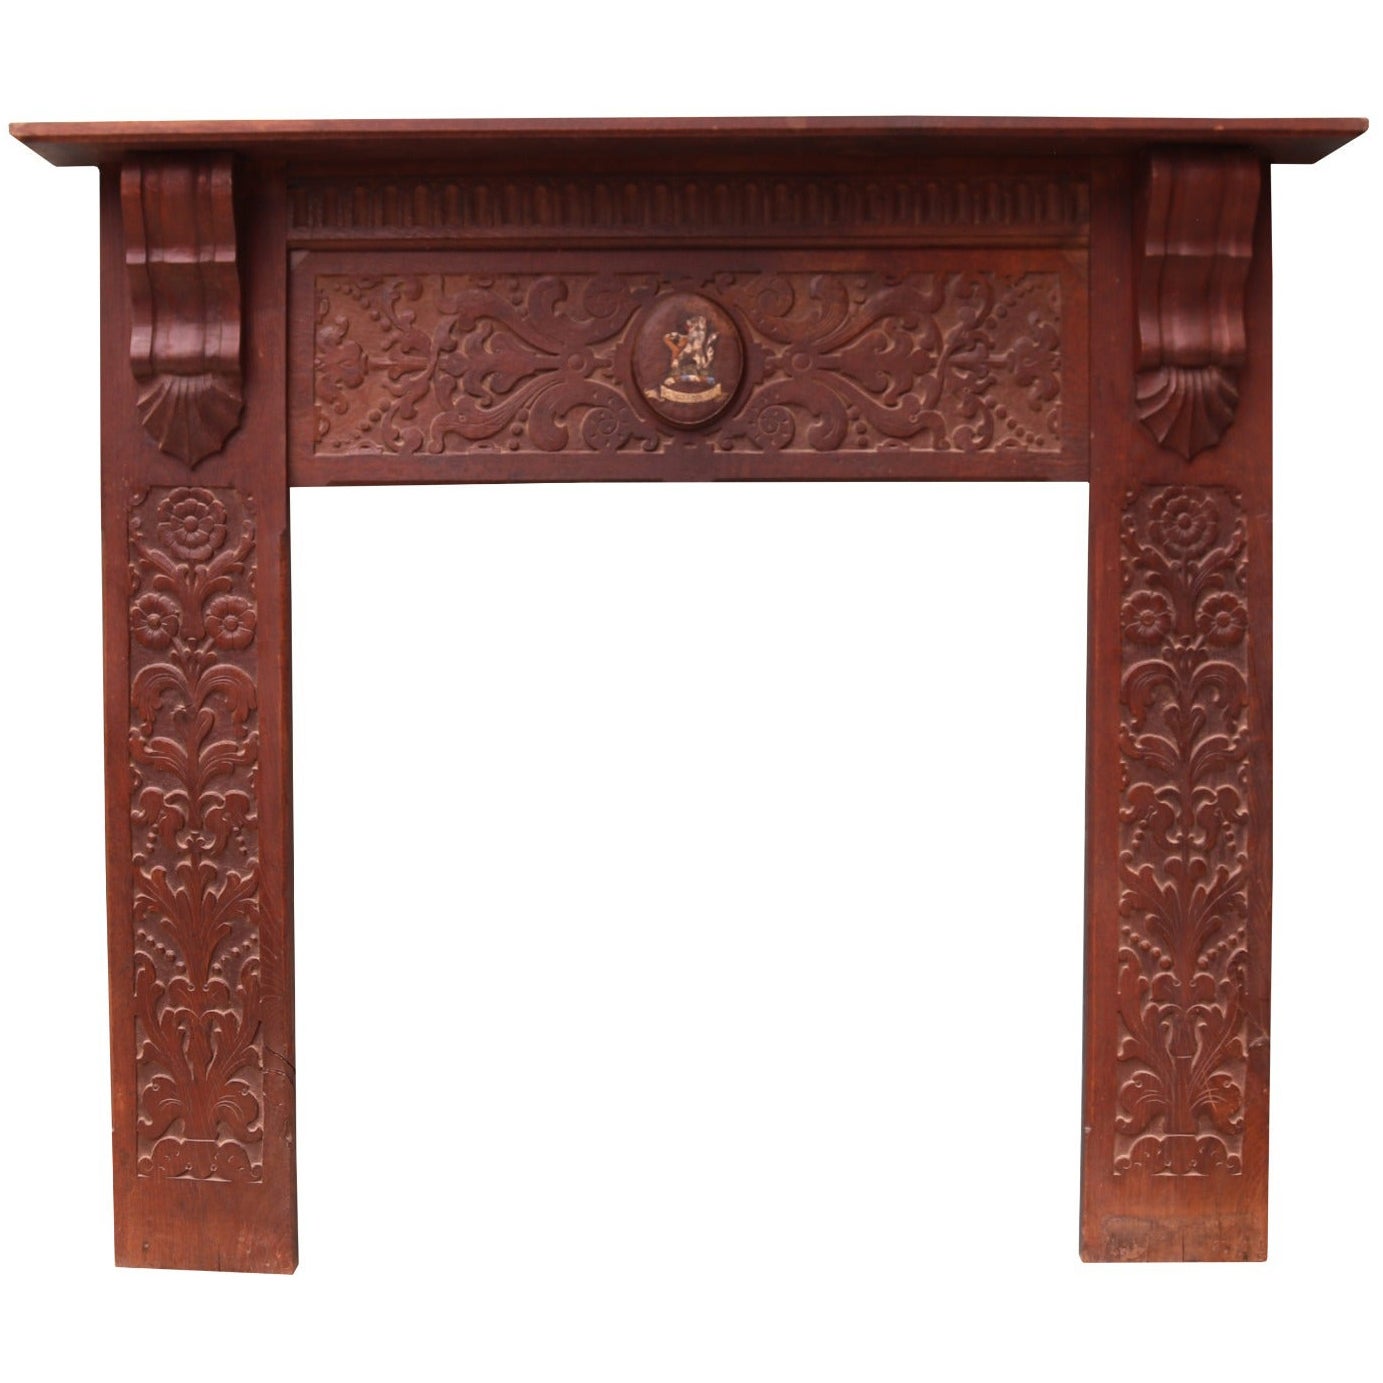 An Antique Jacobean Style Carved Oak Fireplace